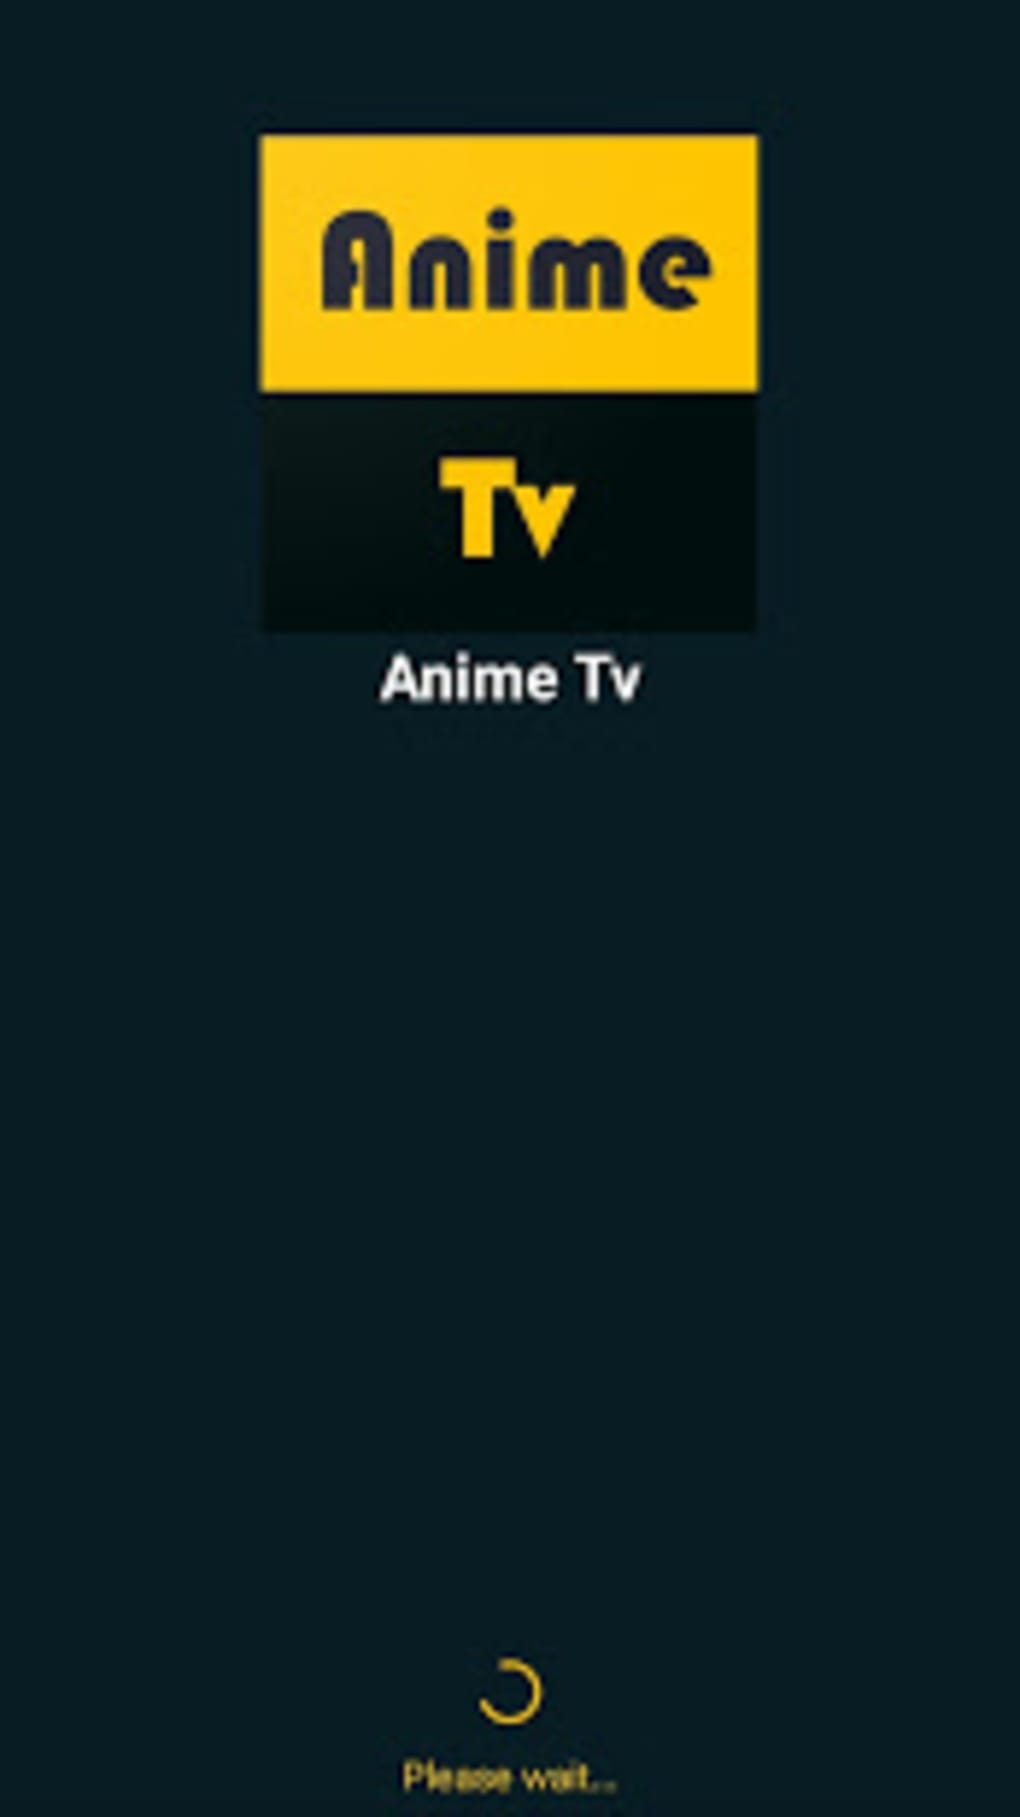 Anime tv - Watch Anime Online - Apps on Google Play